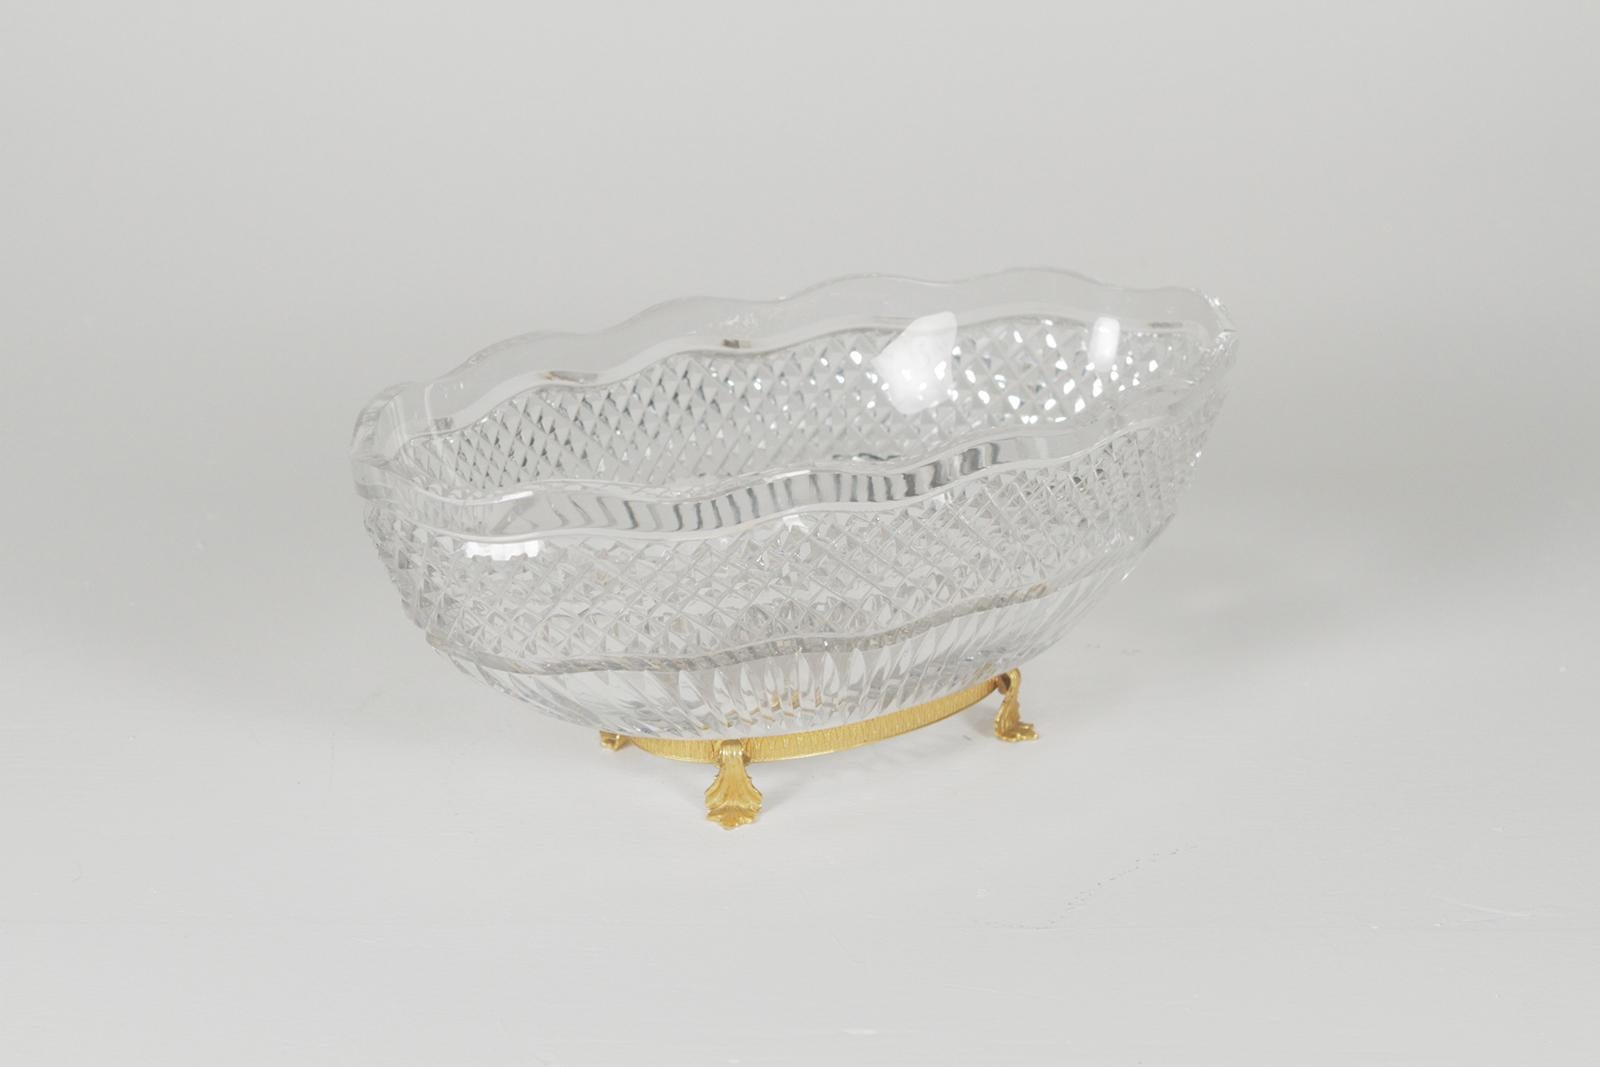 Val St. Lambert Cut Glass Centerpiece Bowl On A Gold Gilt Bronze Base. The oval bowl with all over diamond cuts resting on a gilt bronze footed base.